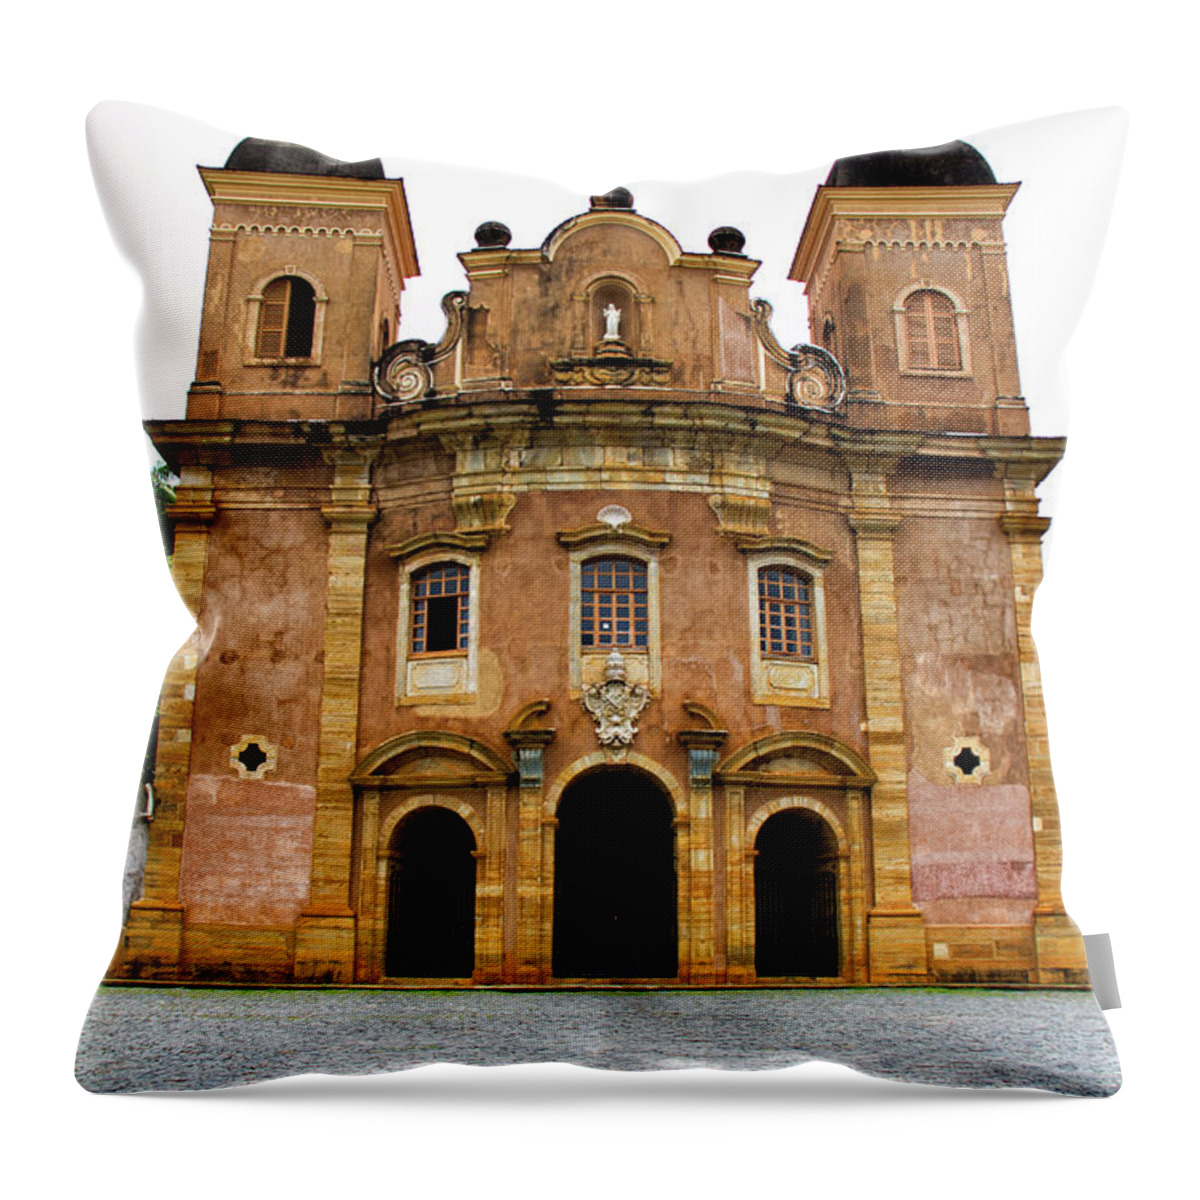 Tranquility Throw Pillow featuring the photograph Church Of St. Peter Of Clerics by Adriana Fuchter